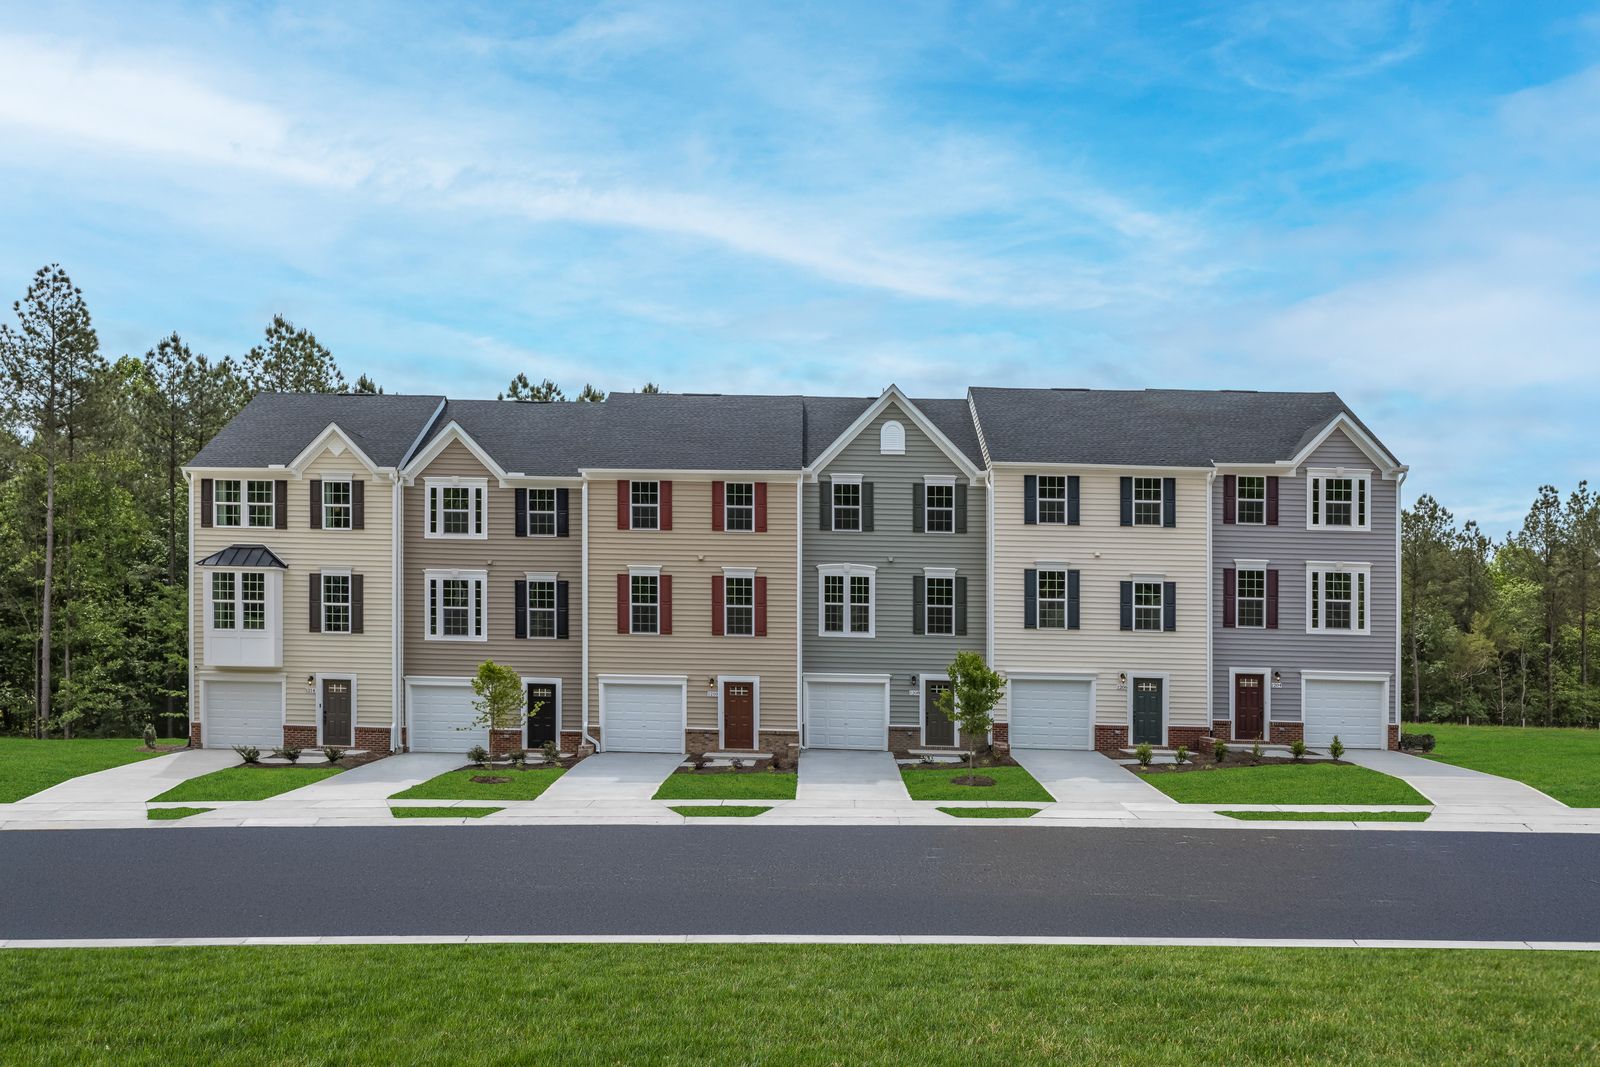 LOWEST PRICED NEW TOWNHOMES IN AN A+ LOCATION NEAR DURHAM, DUKE & RTP - FROM THE LOW $300s